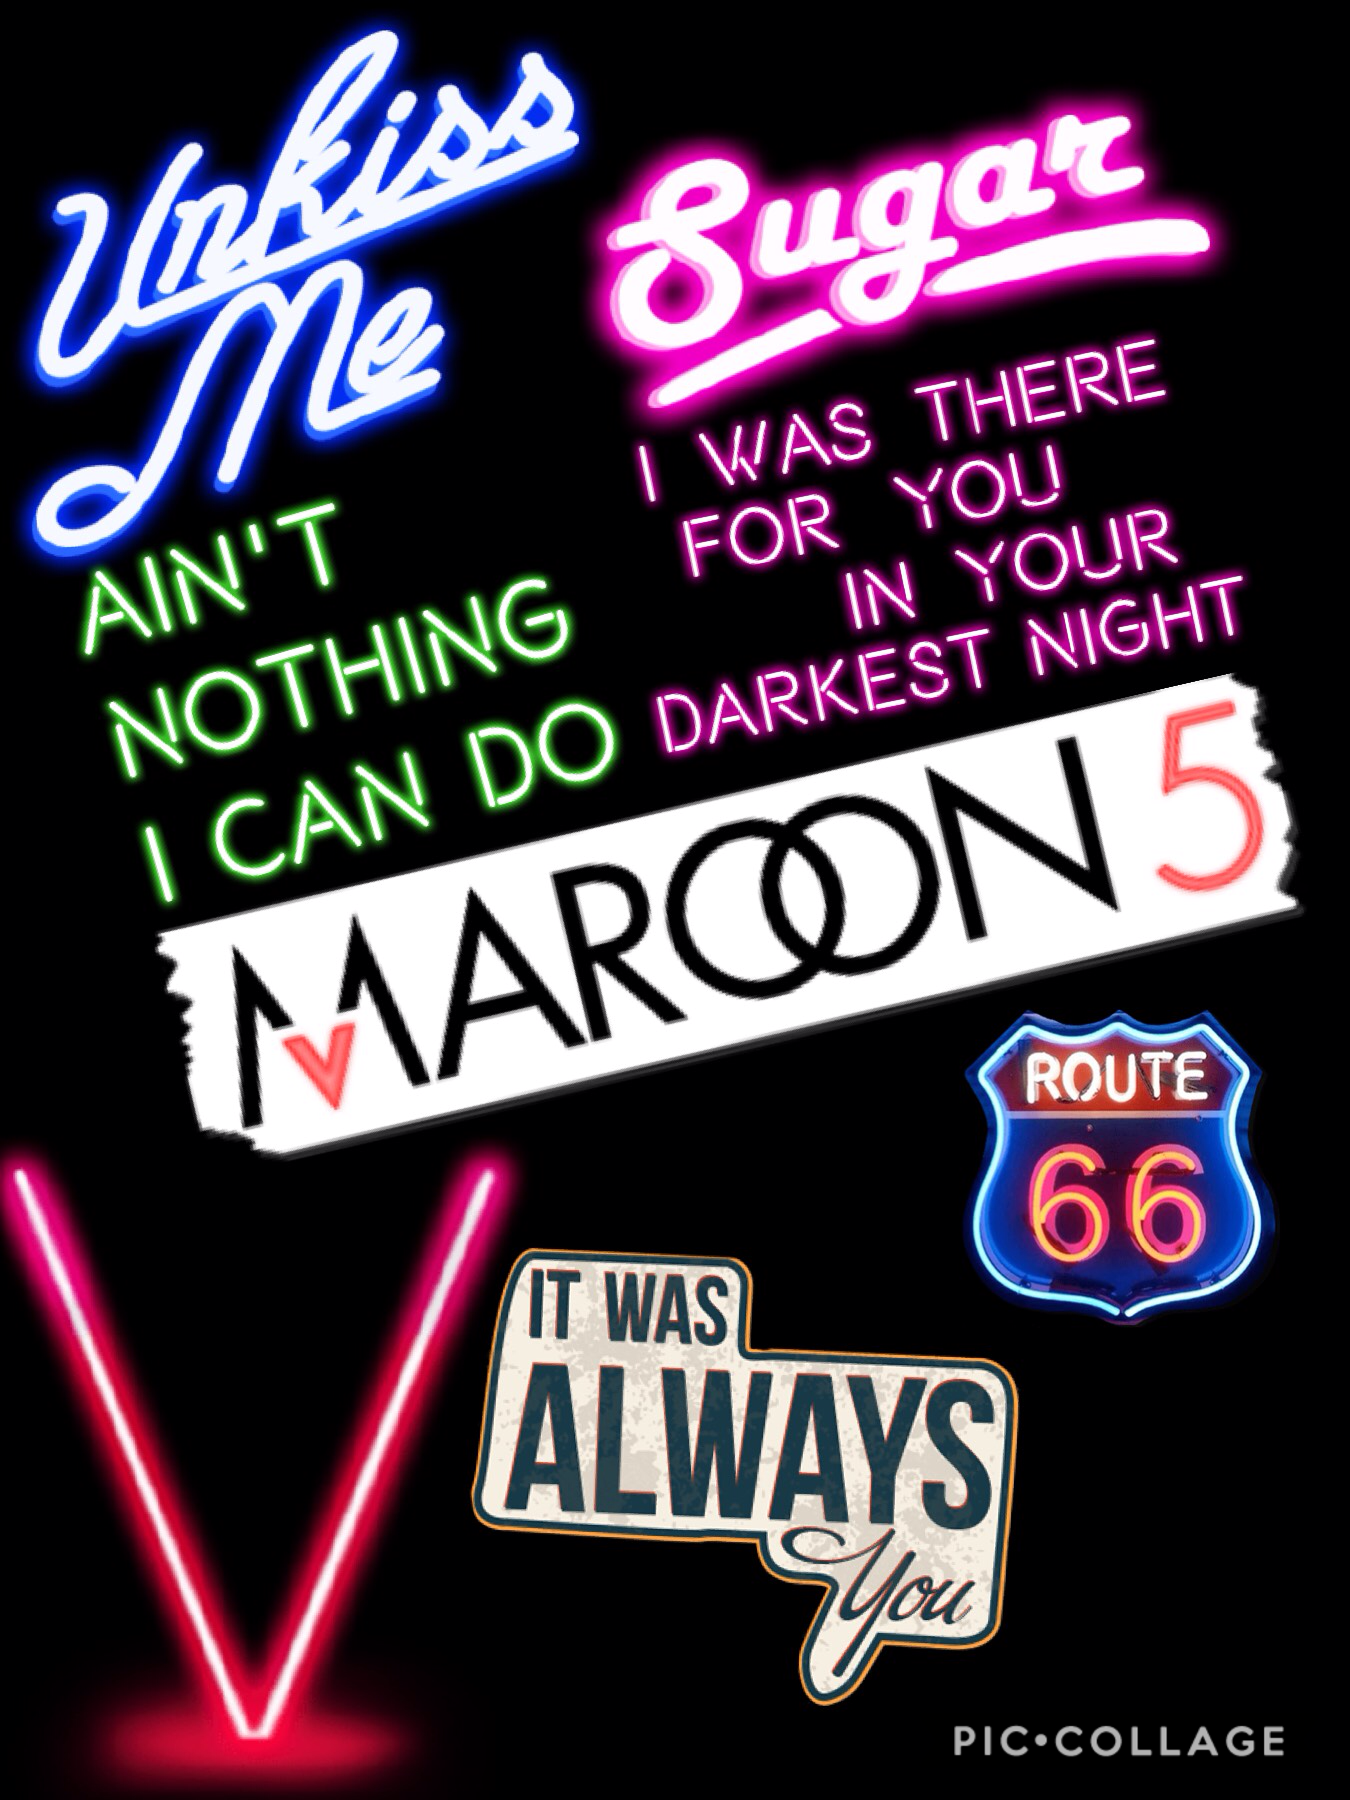 Any Maroon5 fans out there?!